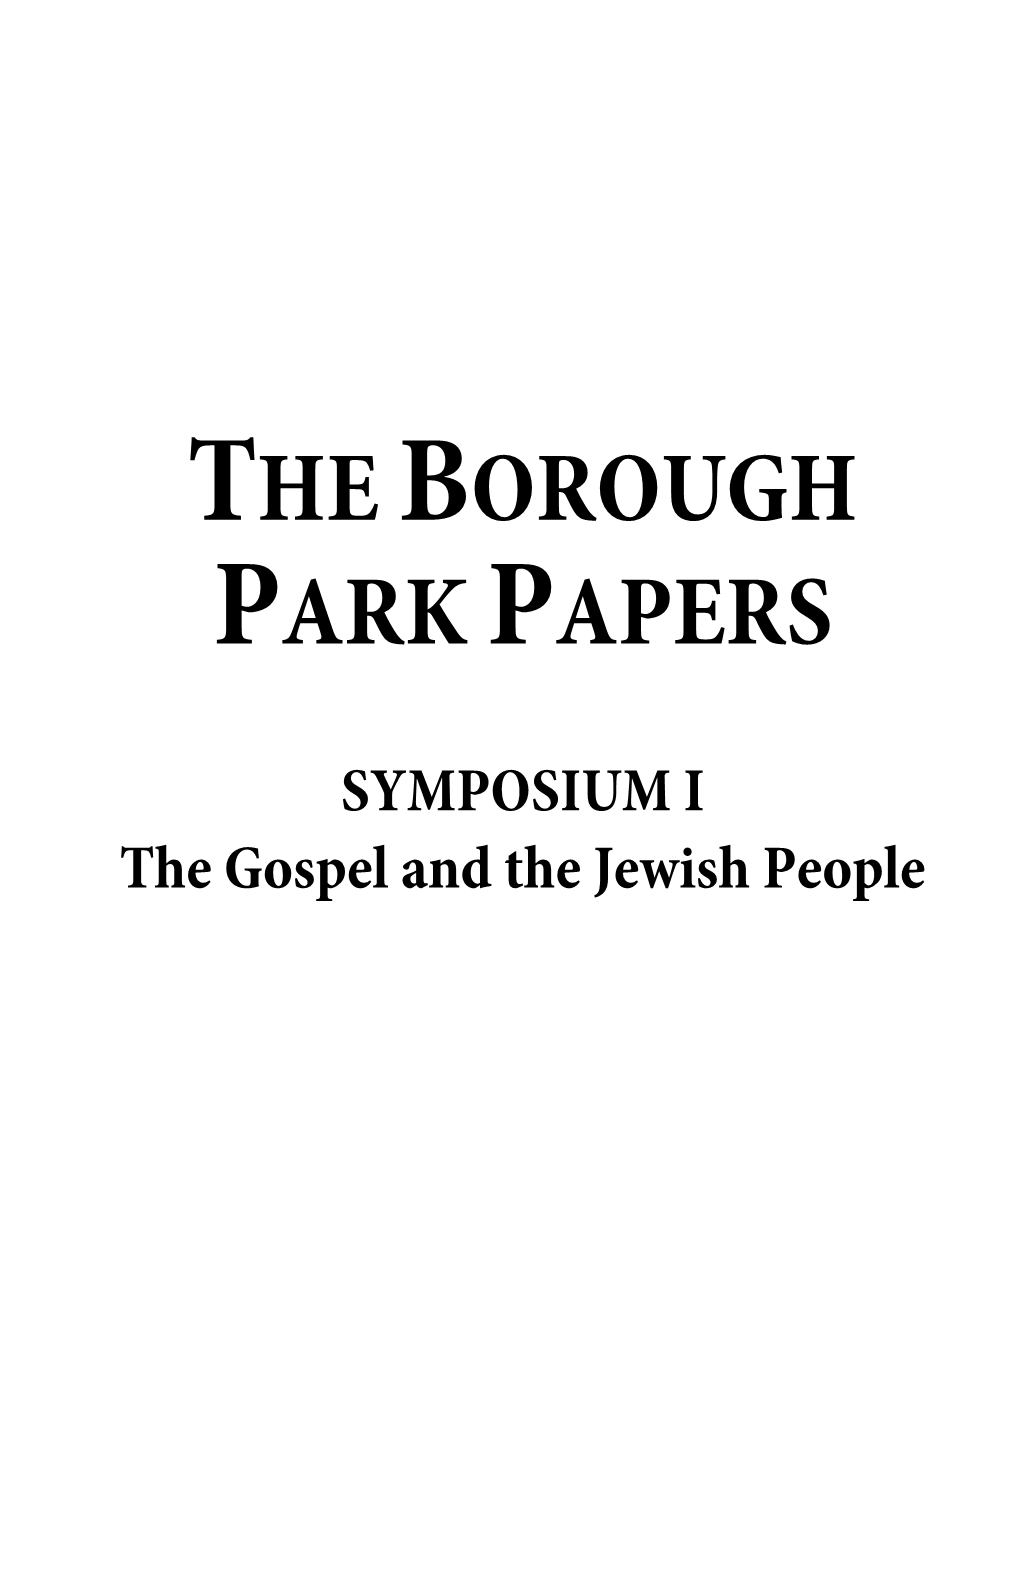 The Borough Park Papers